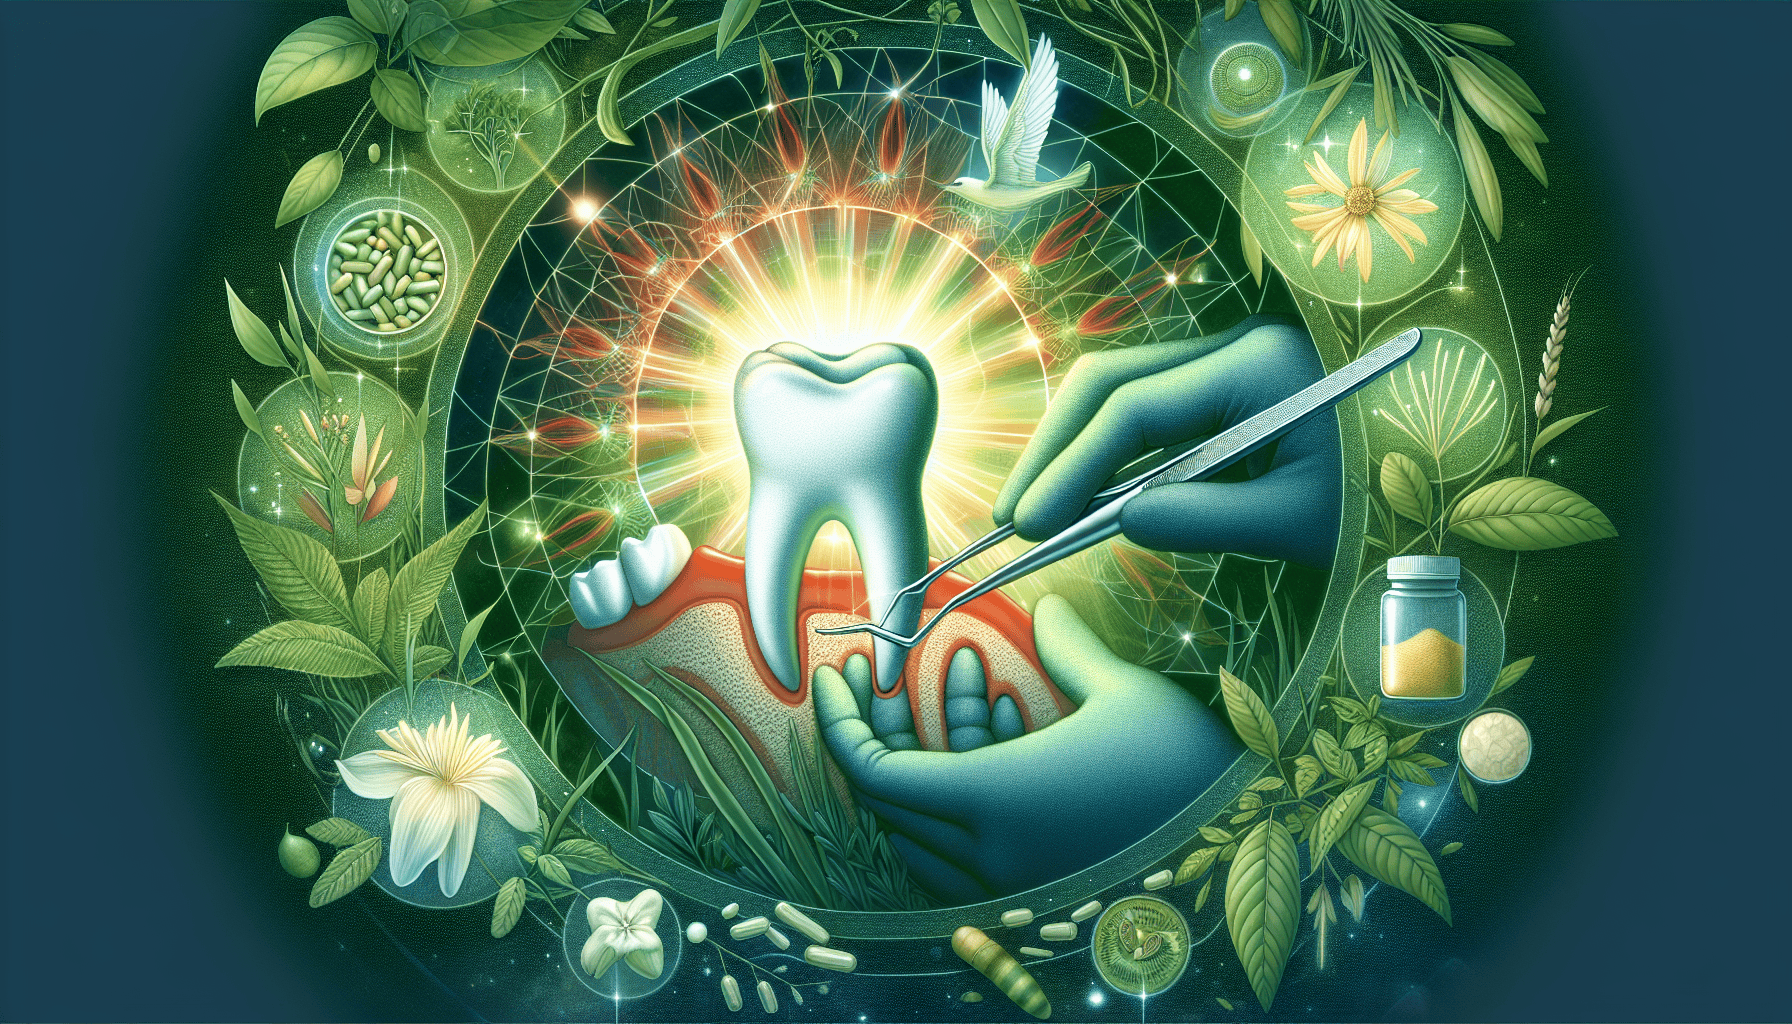 Illustration of alternatives to traditional root canal treatments